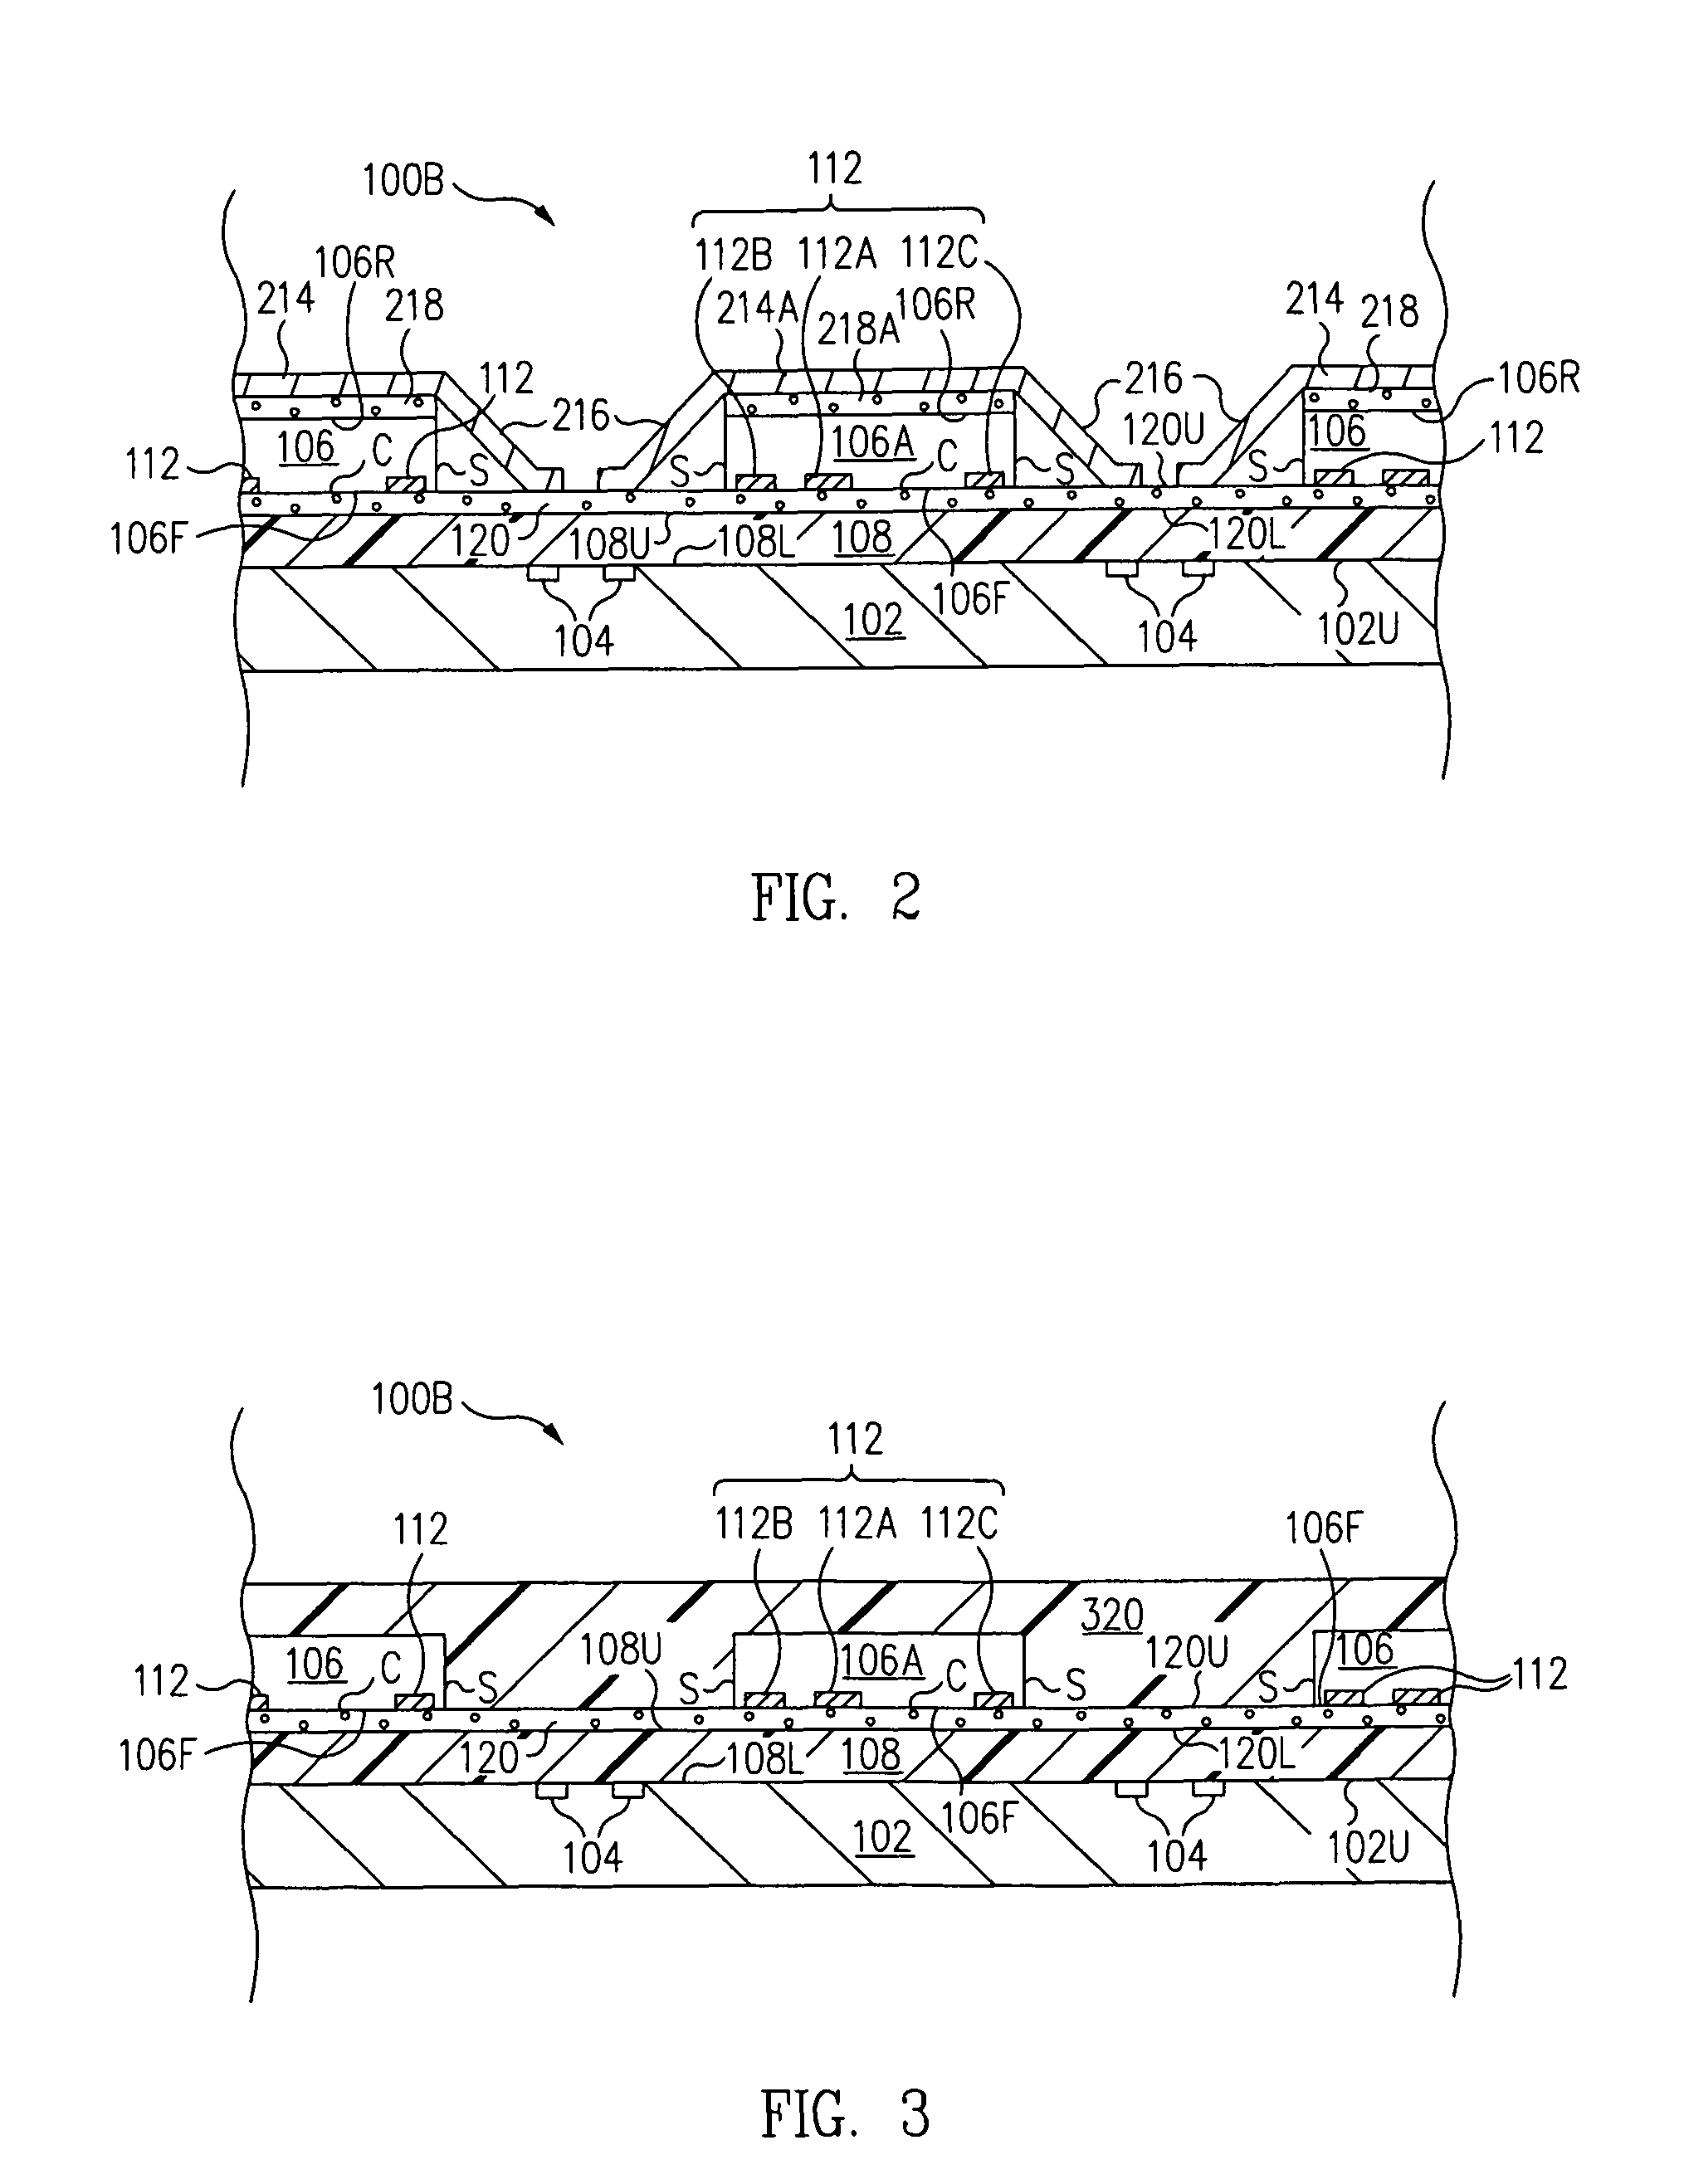 Embedded electronic component package fabrication method